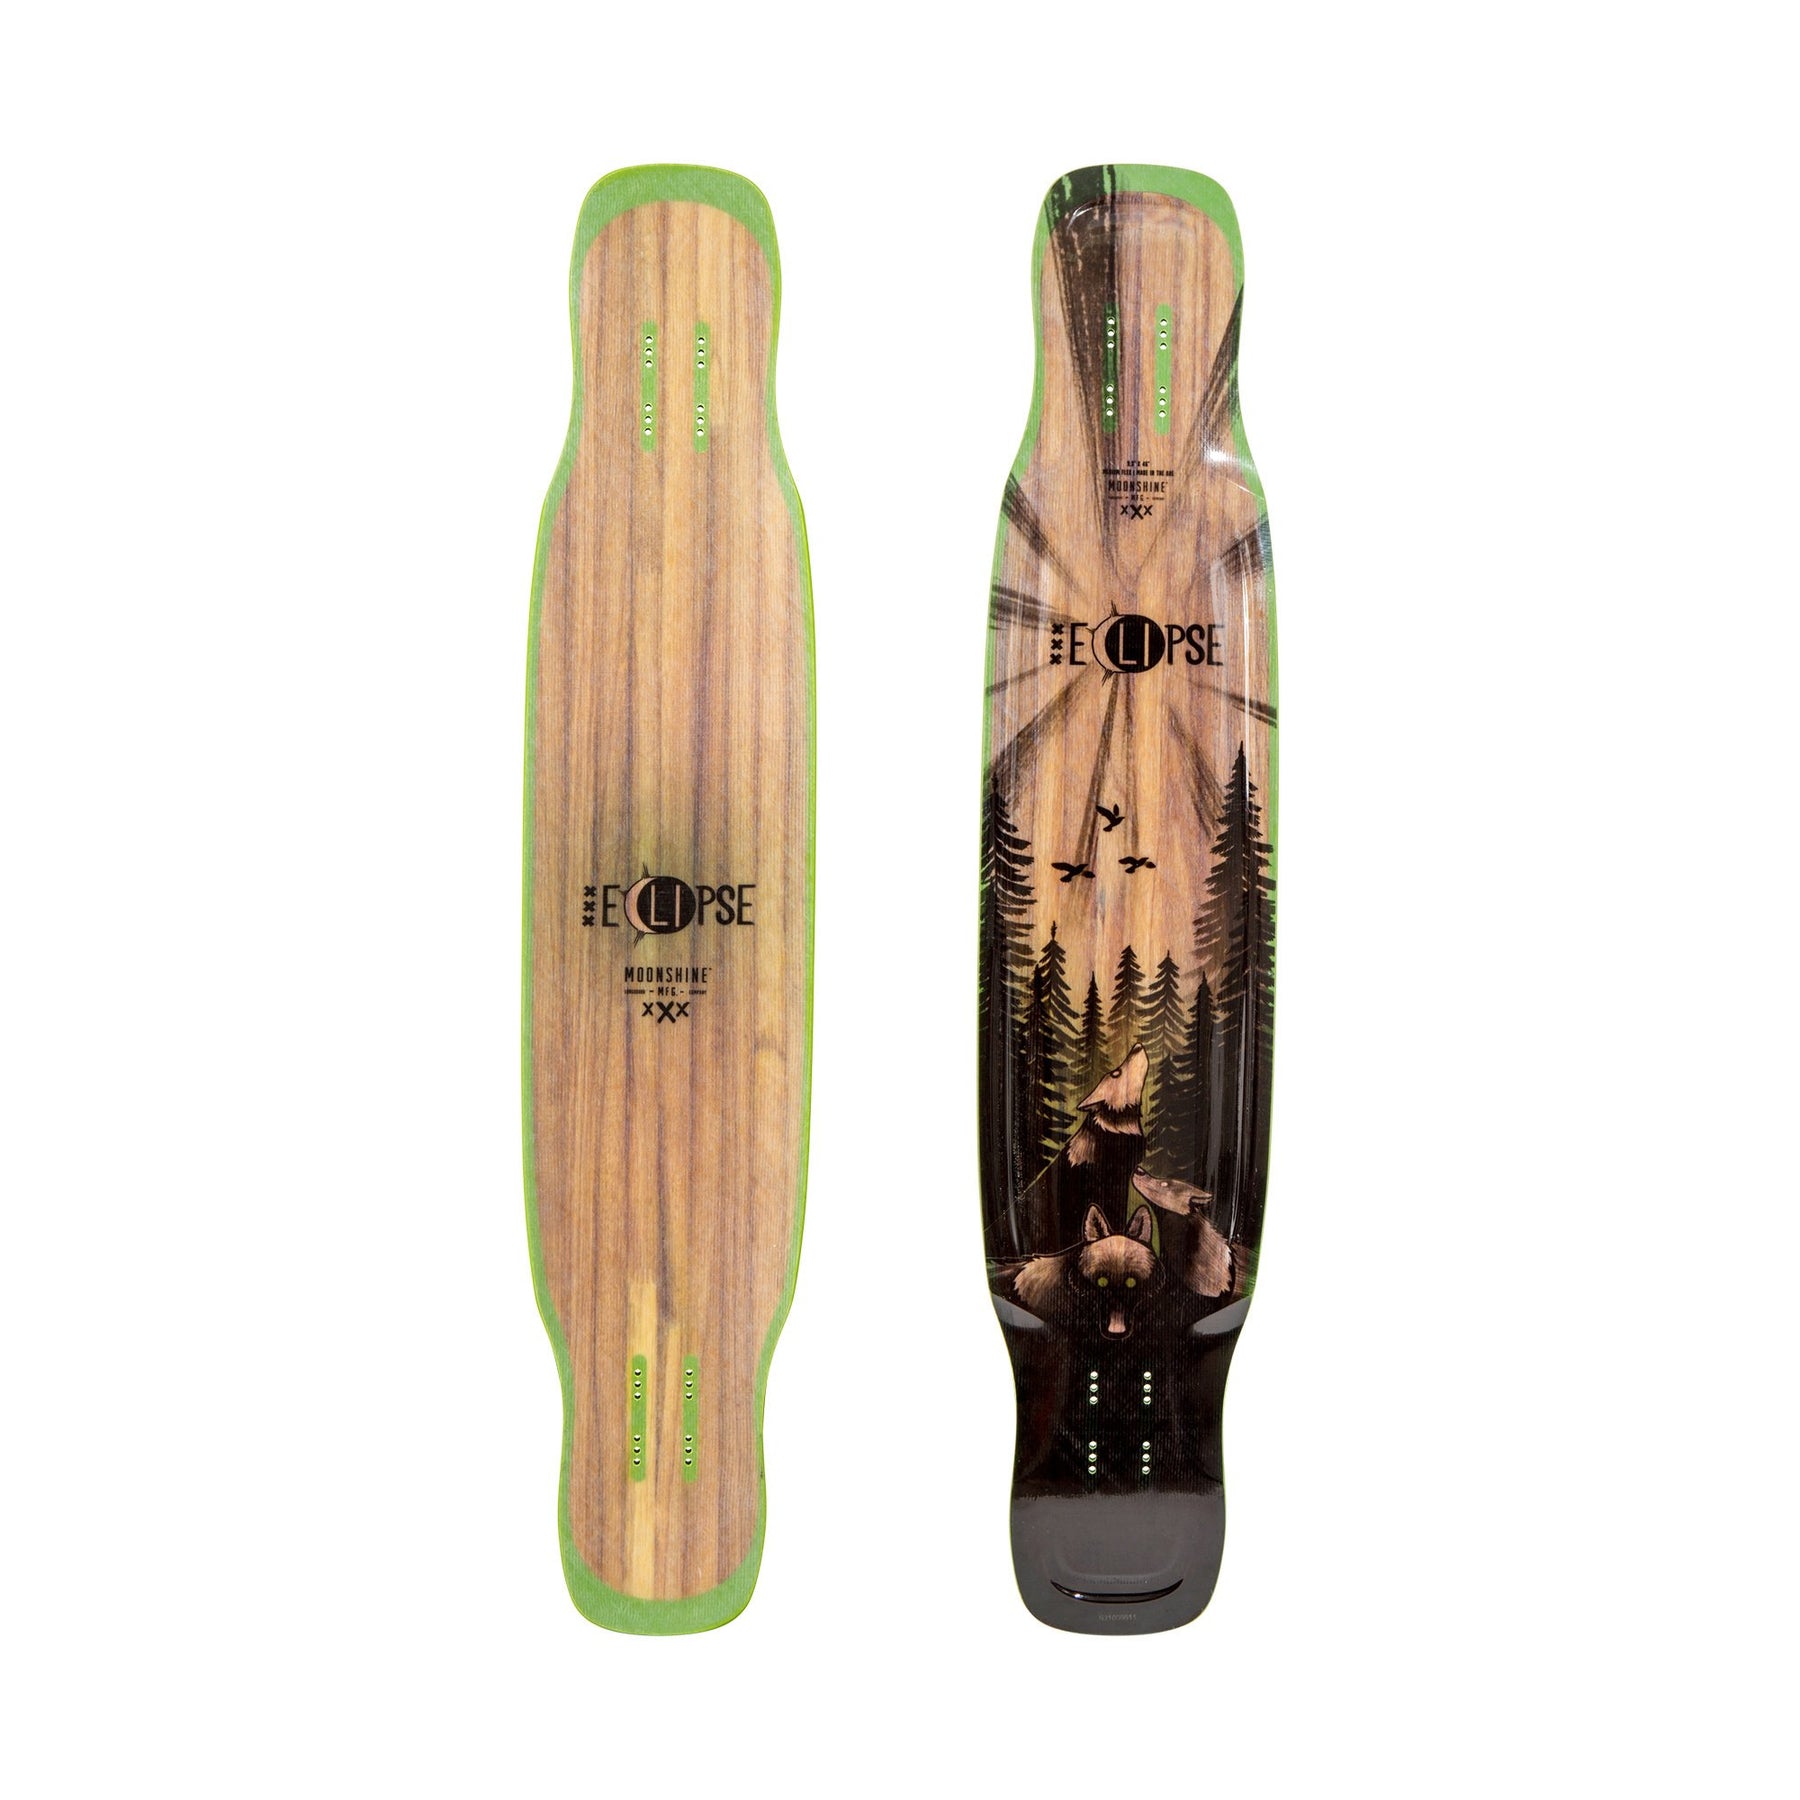 Moonshine Eclipse Longboard, Deck and Complete